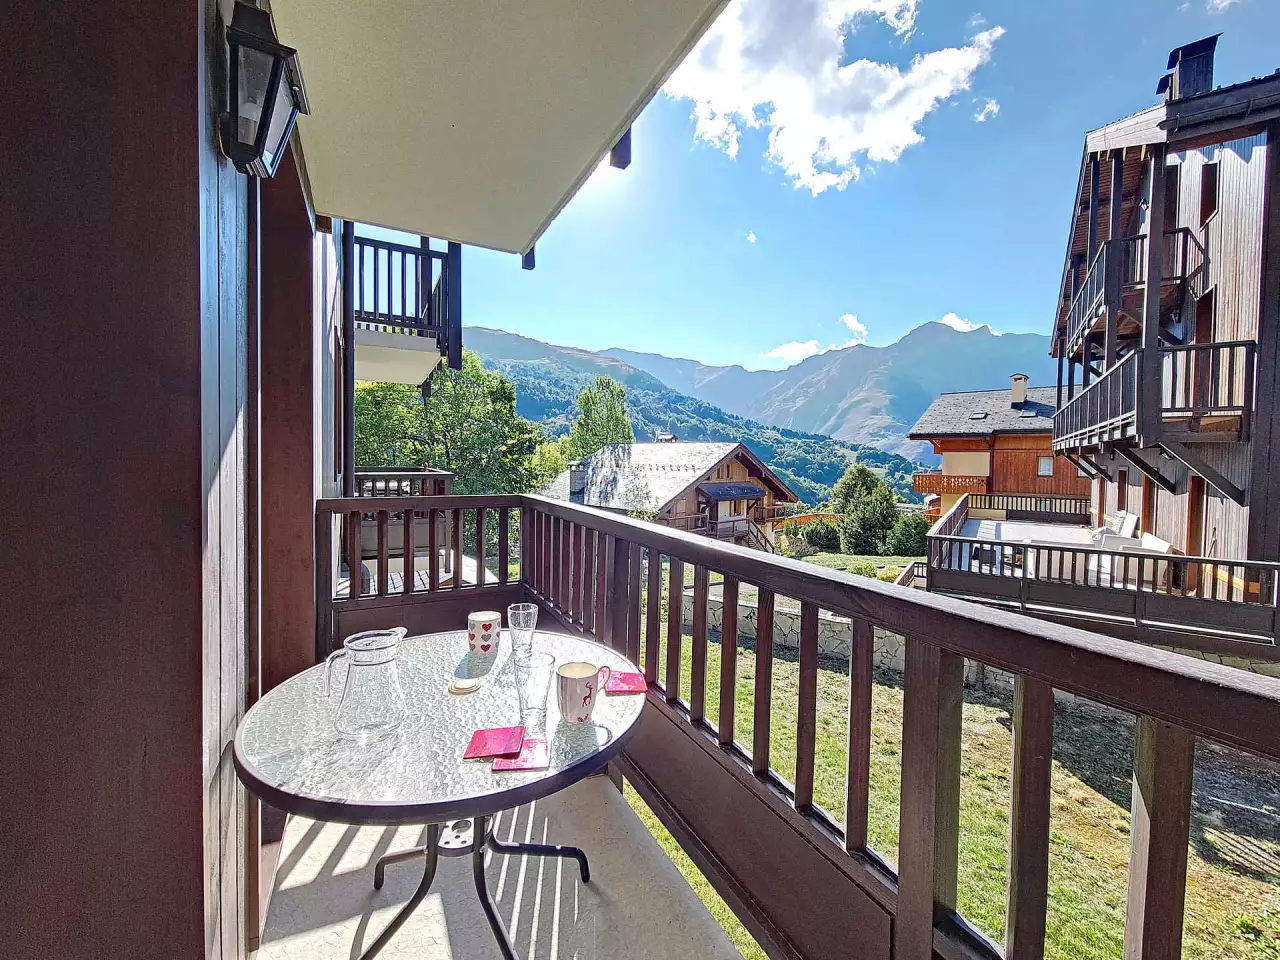 Spacious and comfortable apartment  Close tot the slopes  West balcony  Covered car park